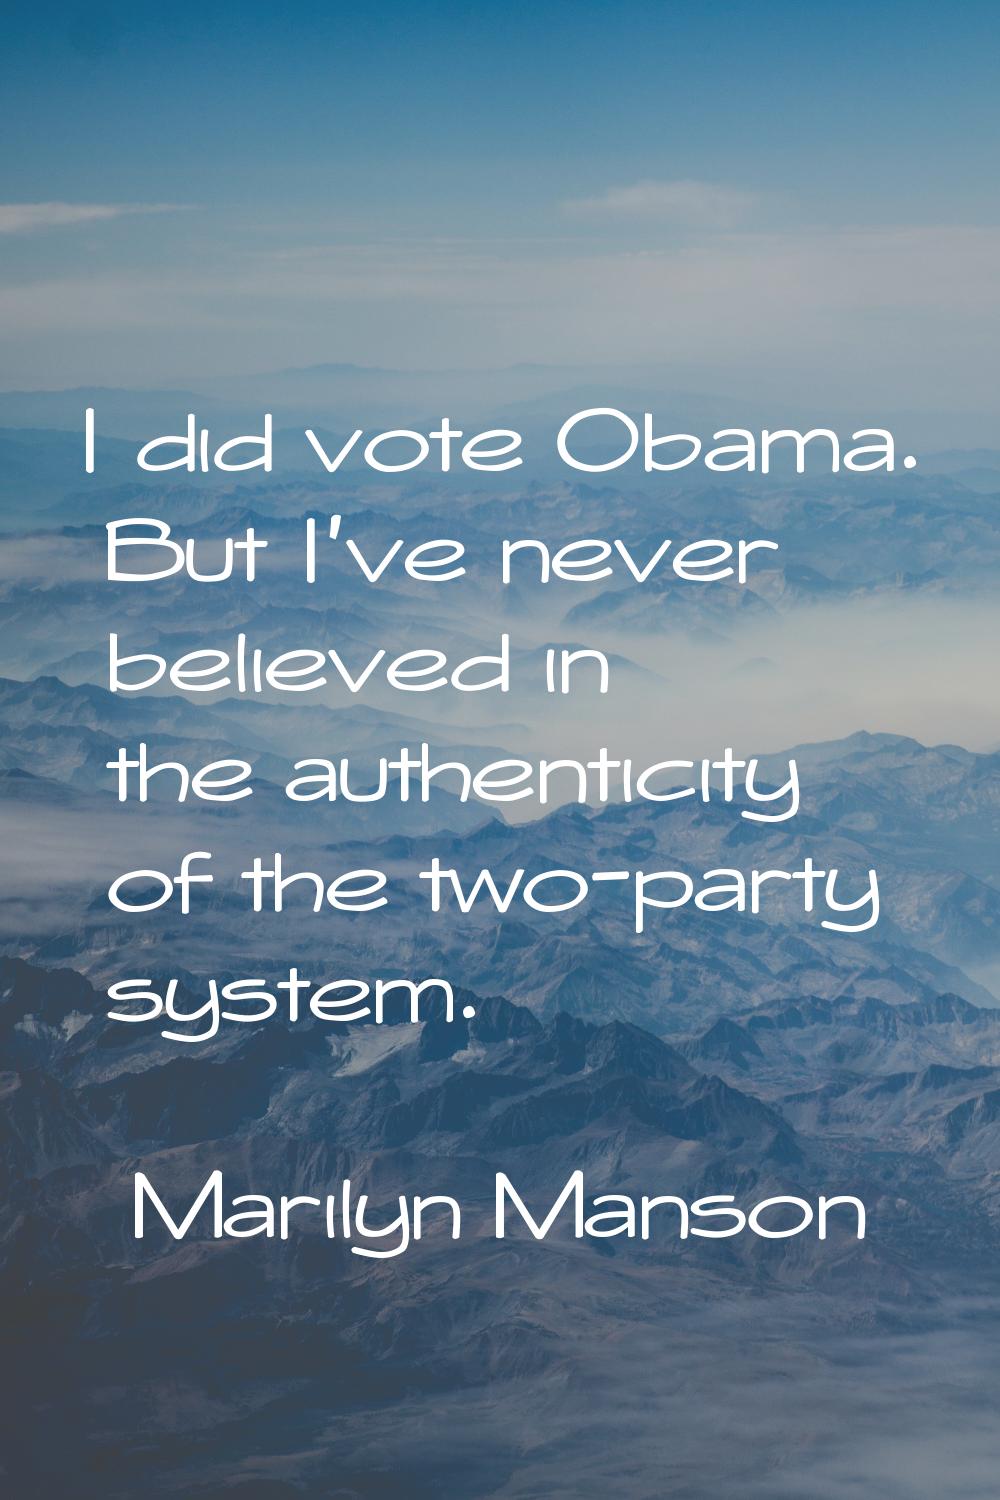 I did vote Obama. But I've never believed in the authenticity of the two-party system.